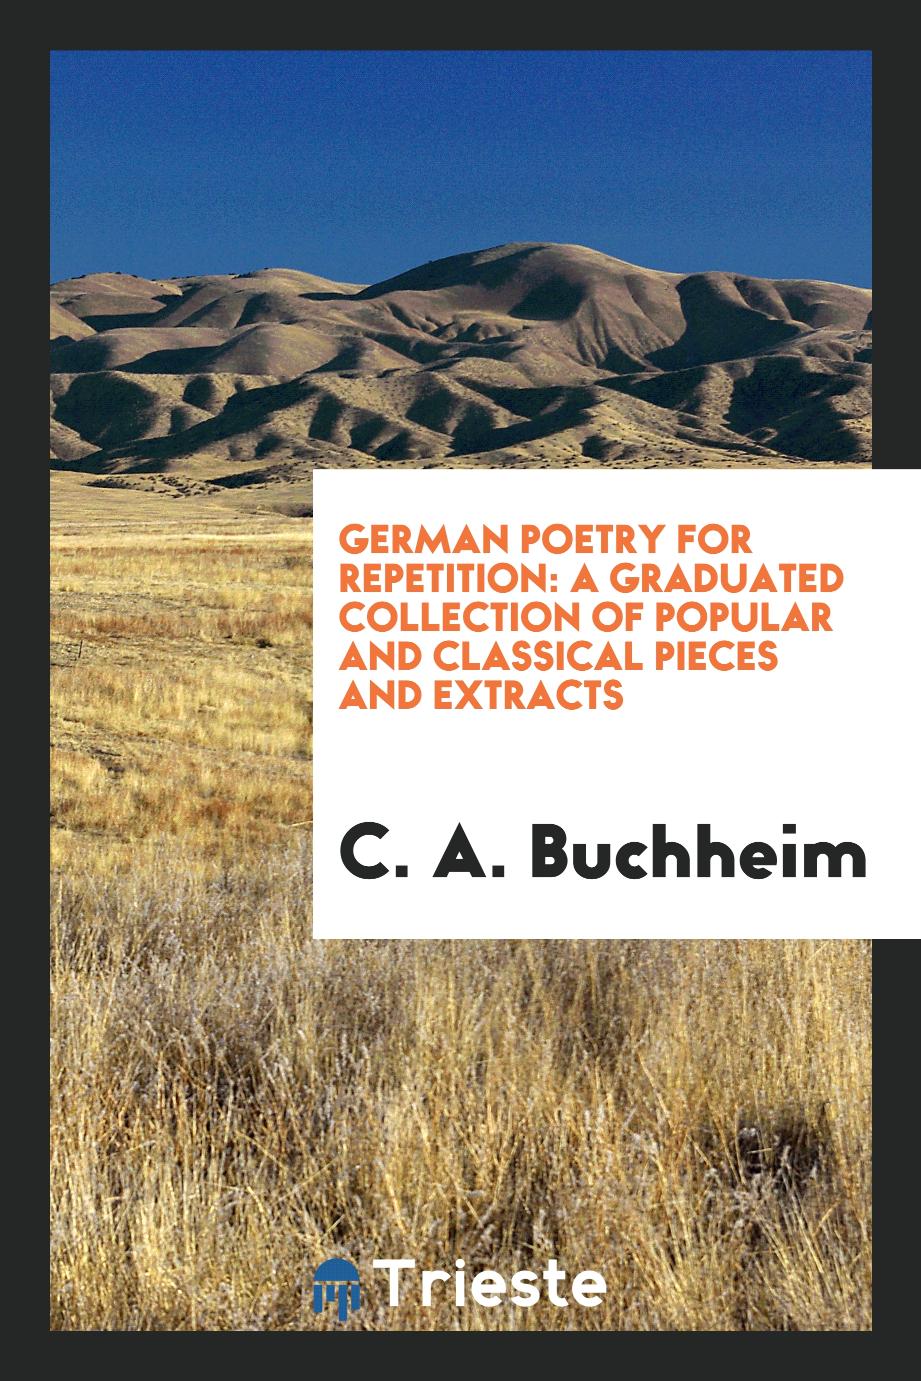 German Poetry for Repetition: A Graduated Collection of Popular and Classical Pieces and Extracts